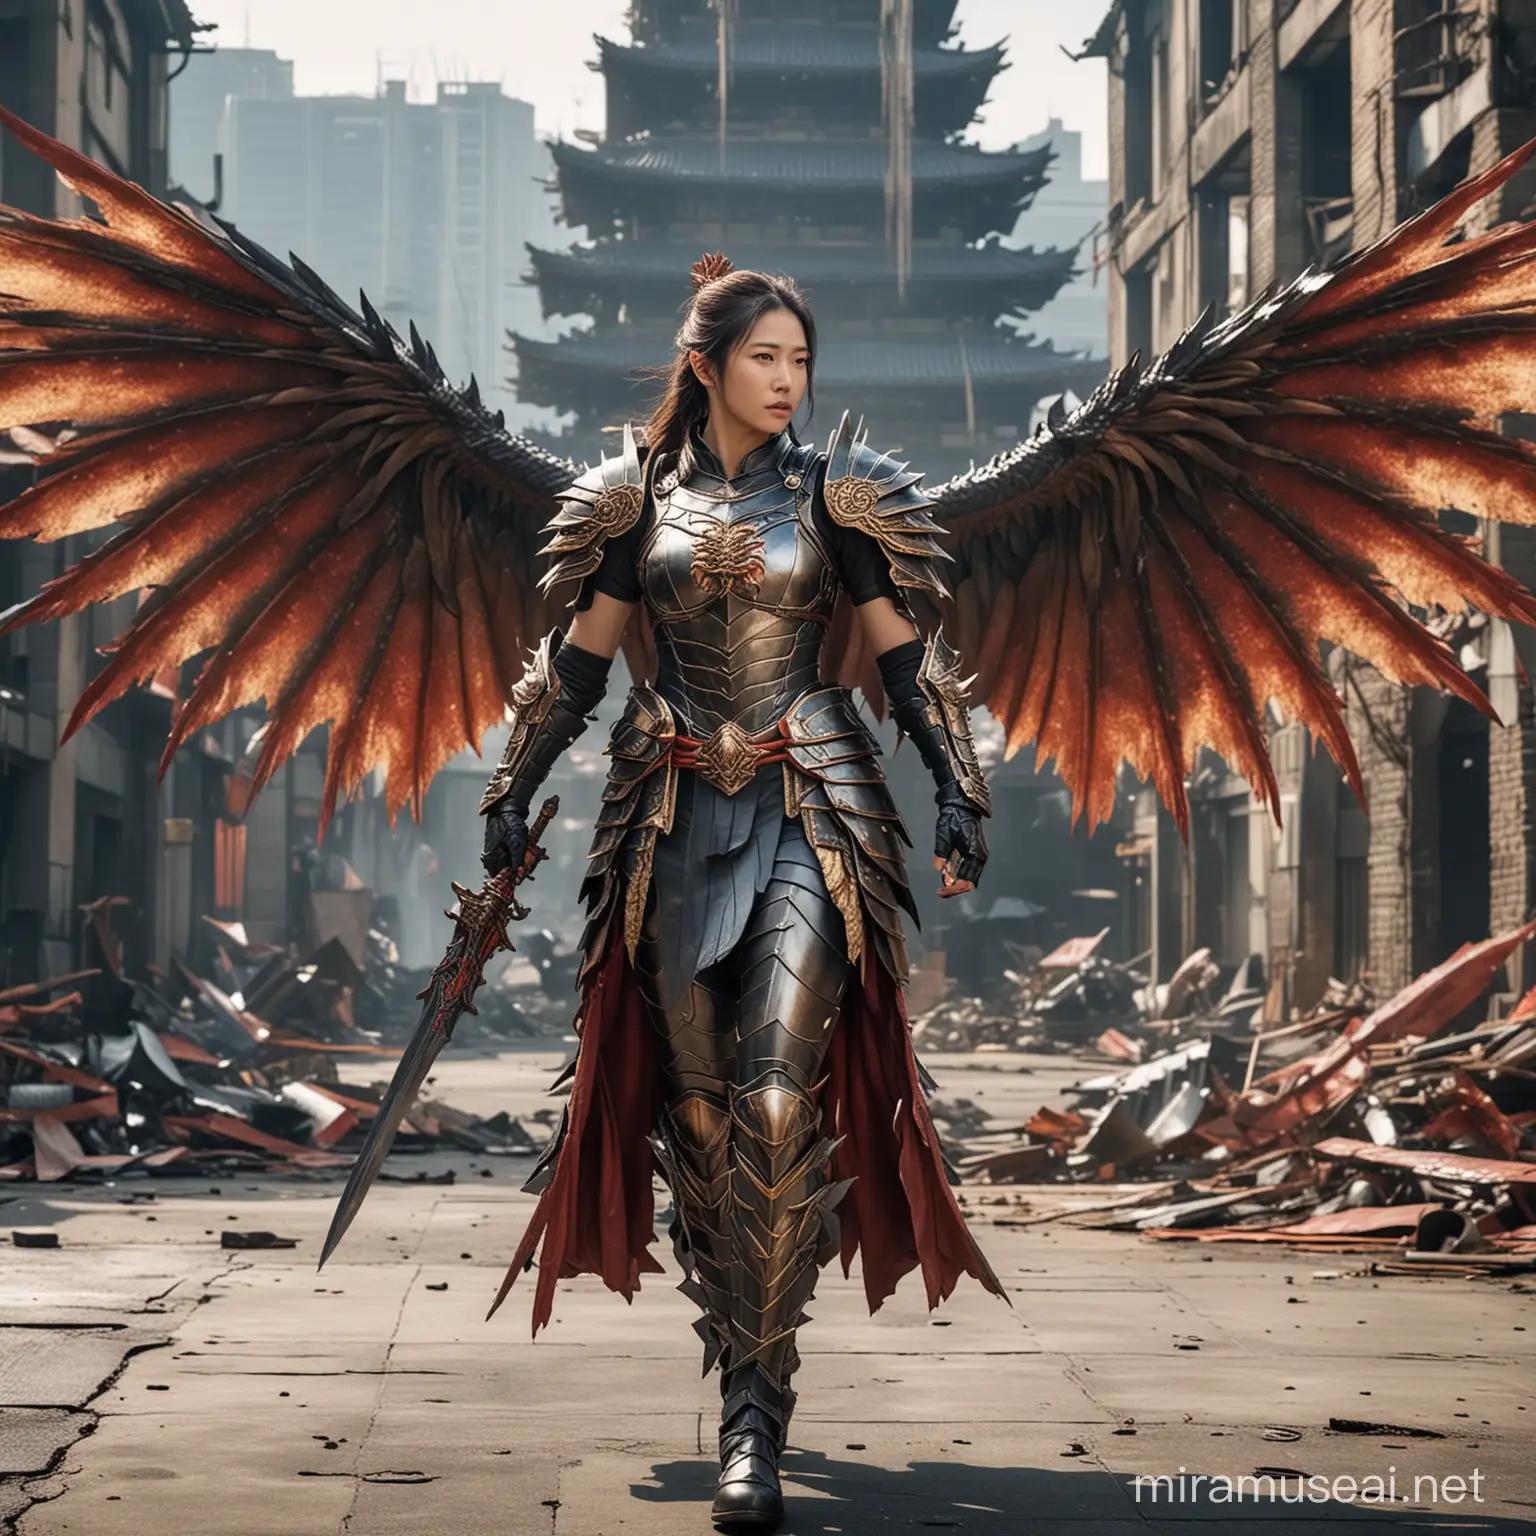 Japanese Warrior Woman with Winged Armor Facing Dragon amid City Destruction